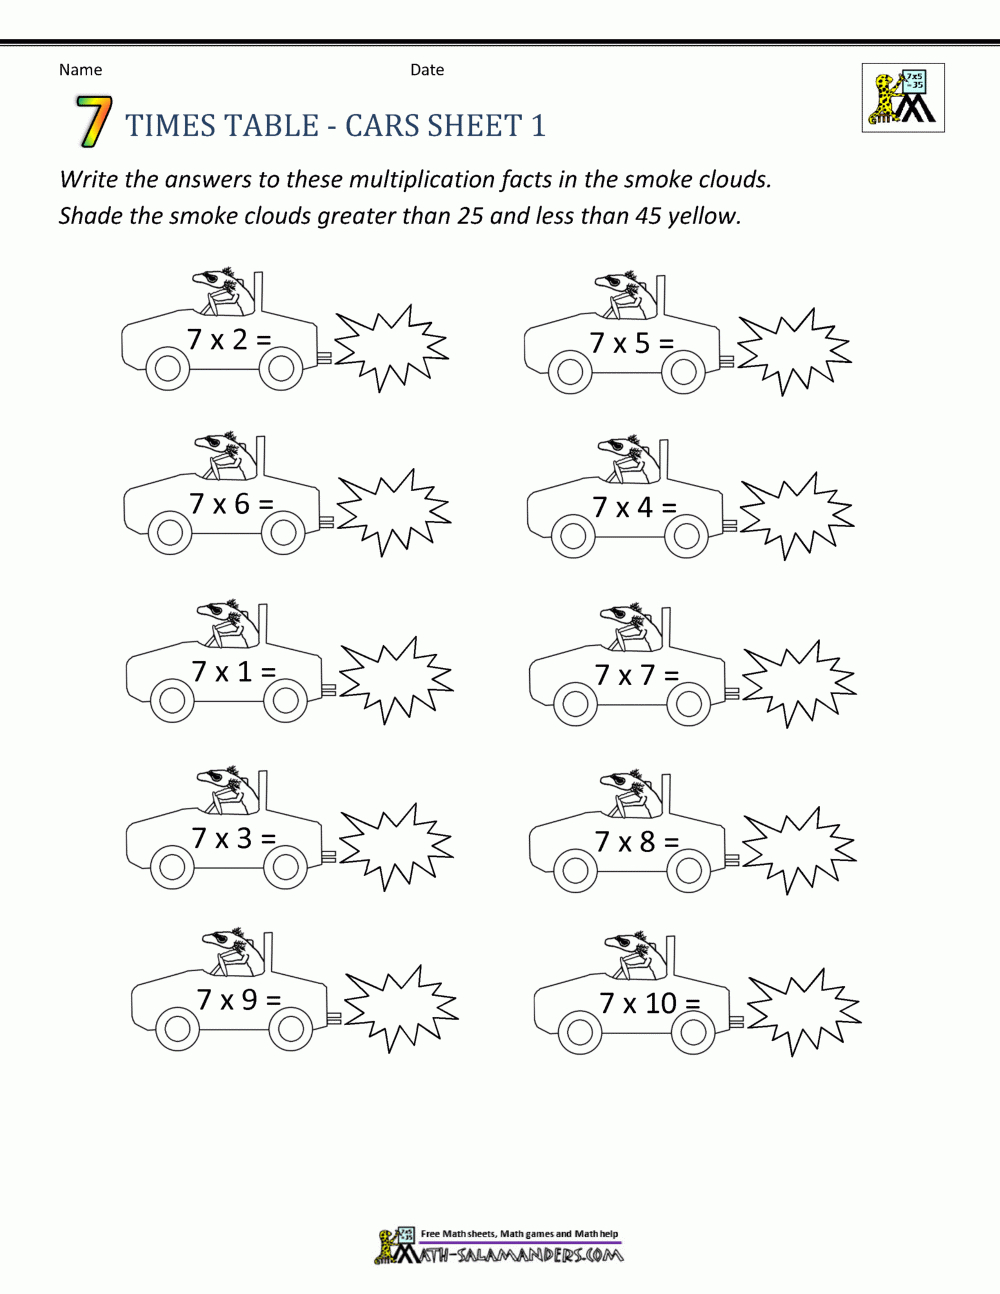 Free Times Table Worksheets - 7 Times Table for Multiplication Worksheets 7S